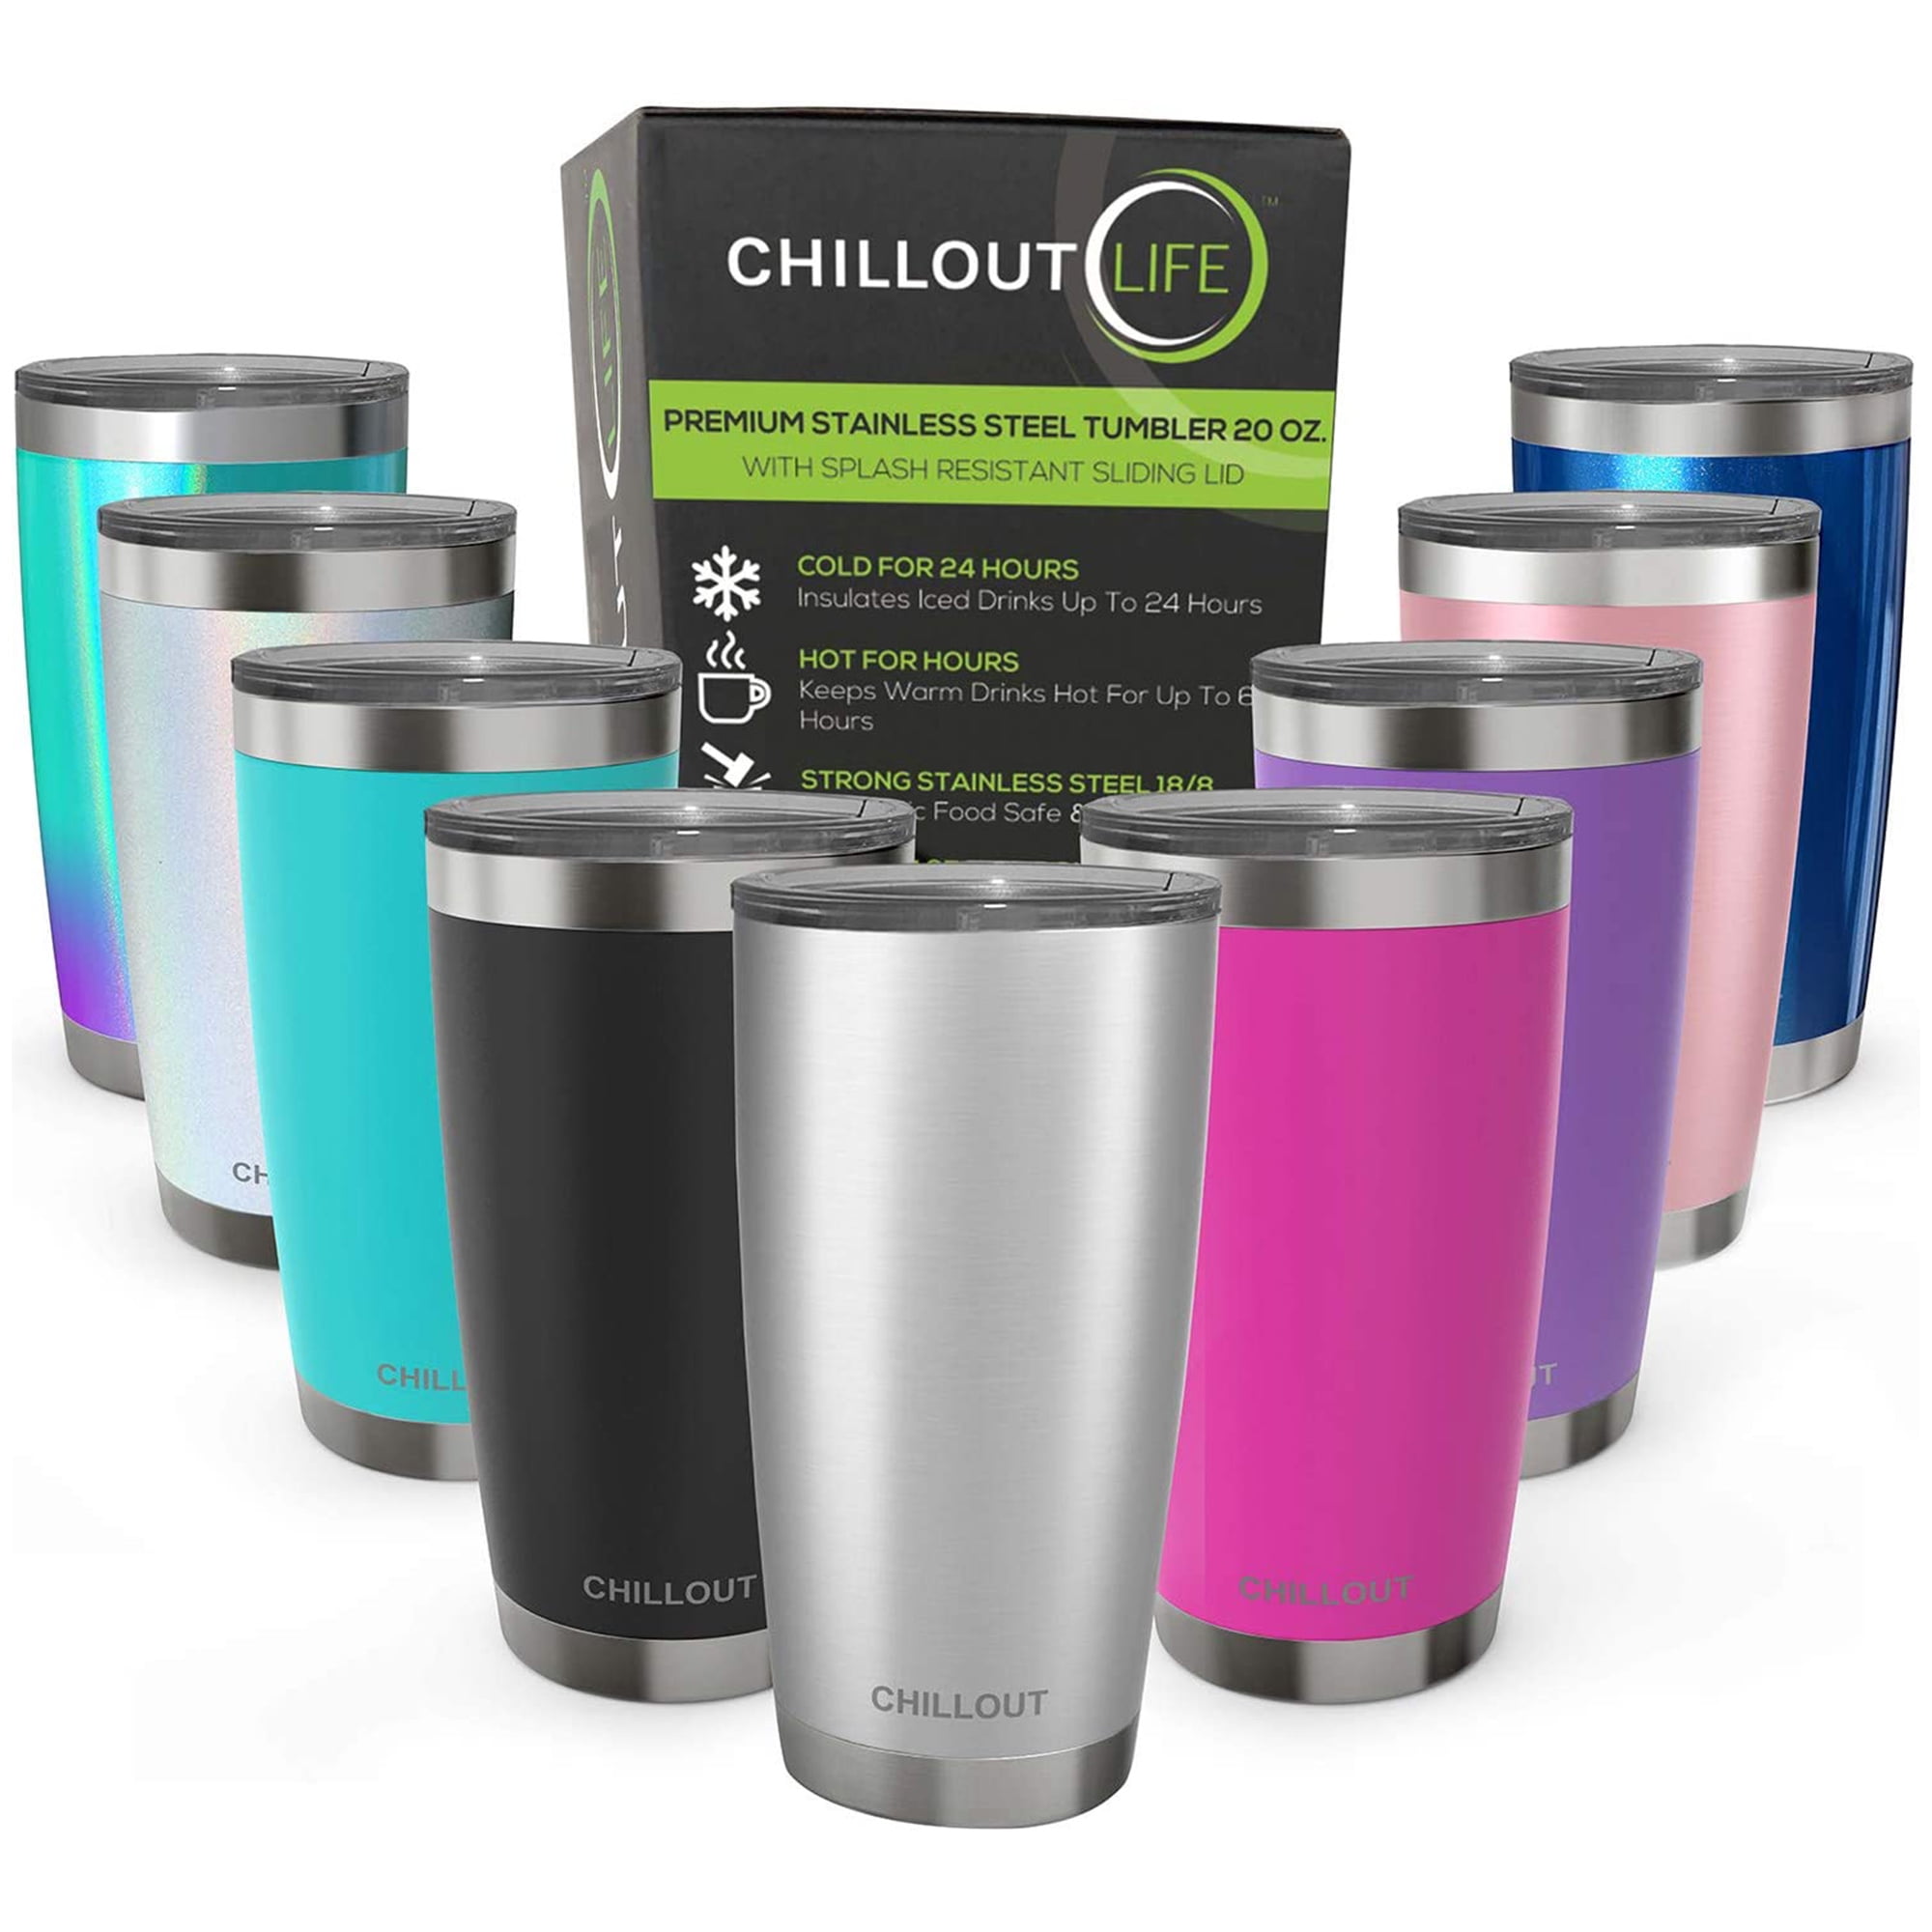 CHILLOUT LIFE Stainless Steel Cups for Kids and Toddlers 8 oz + Silico